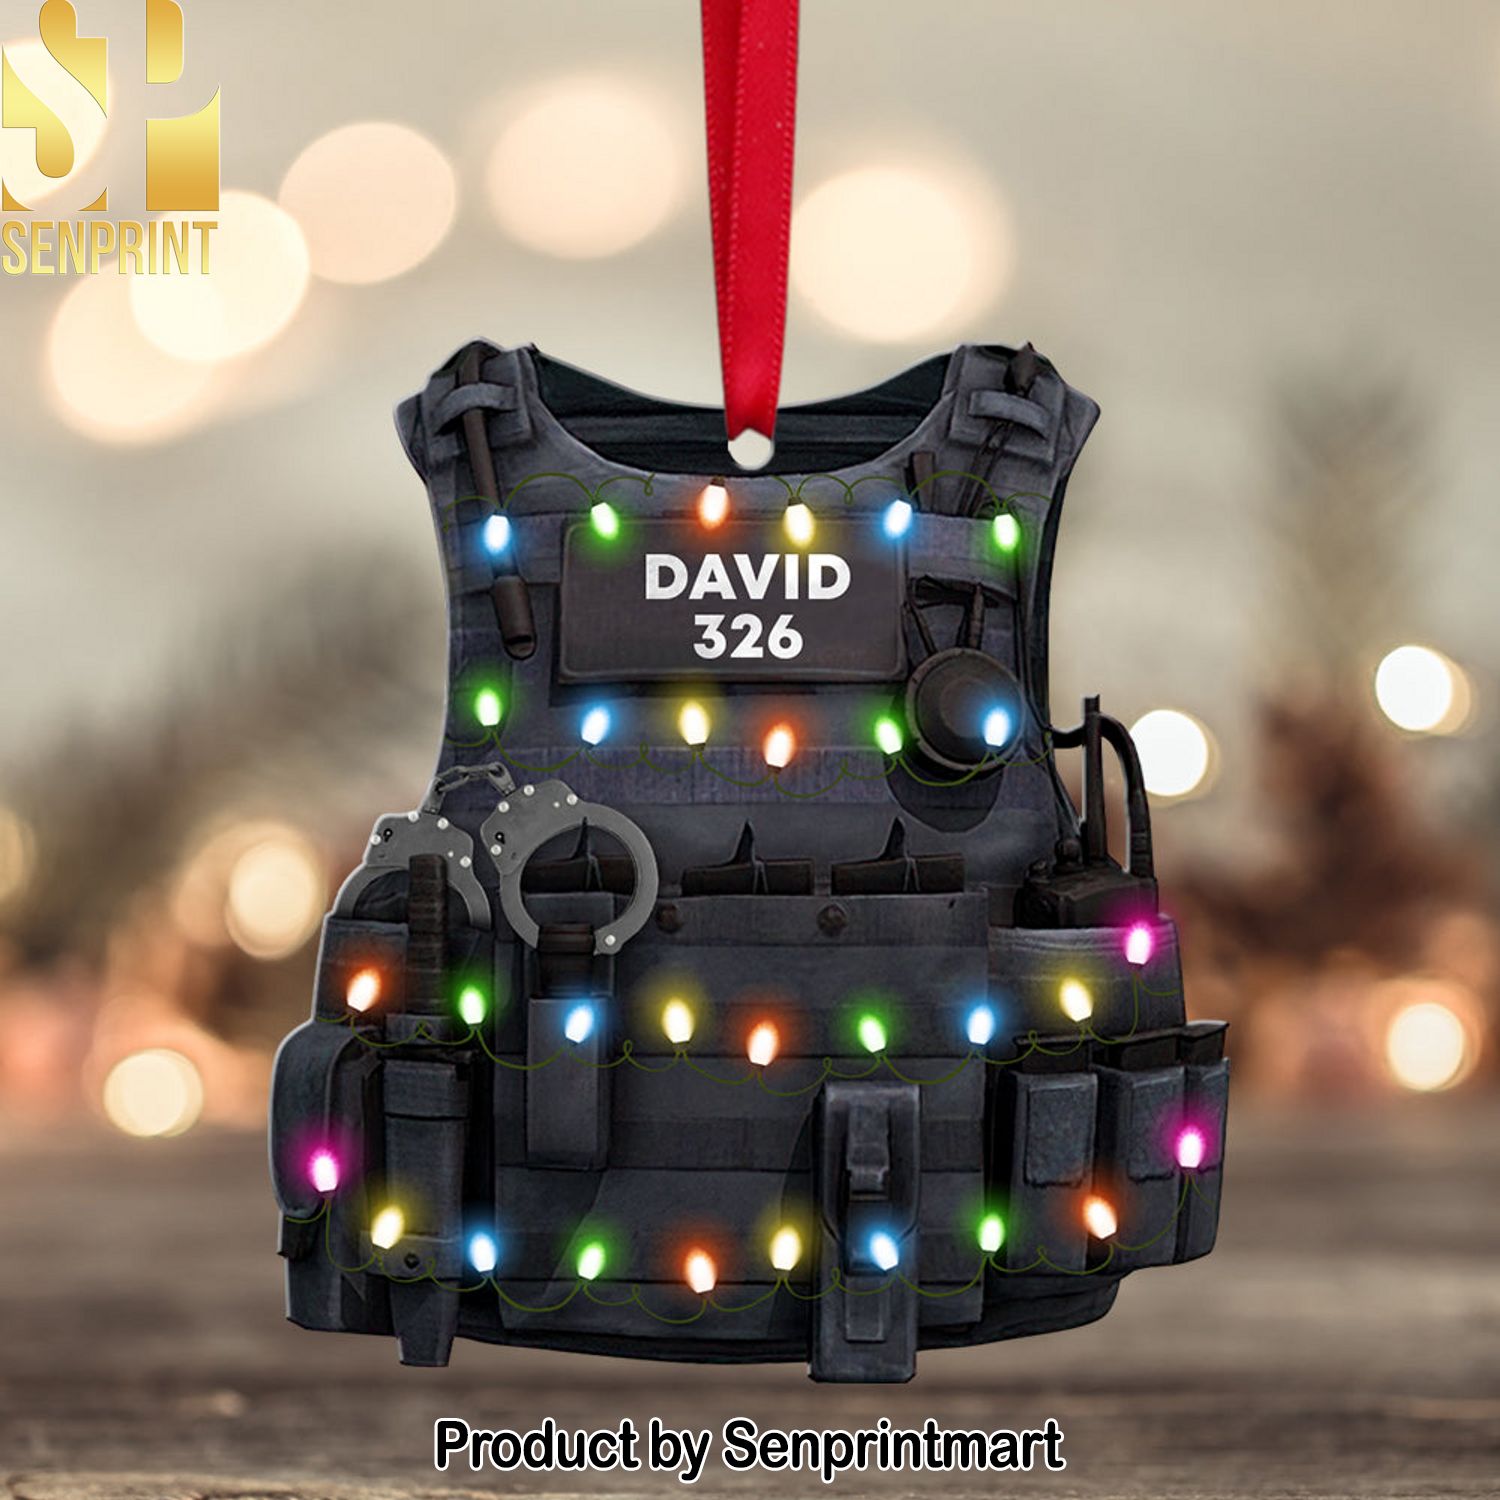 Police Bulletproof Vest, Personalized Ornament, Gift Ideas For Police Officers